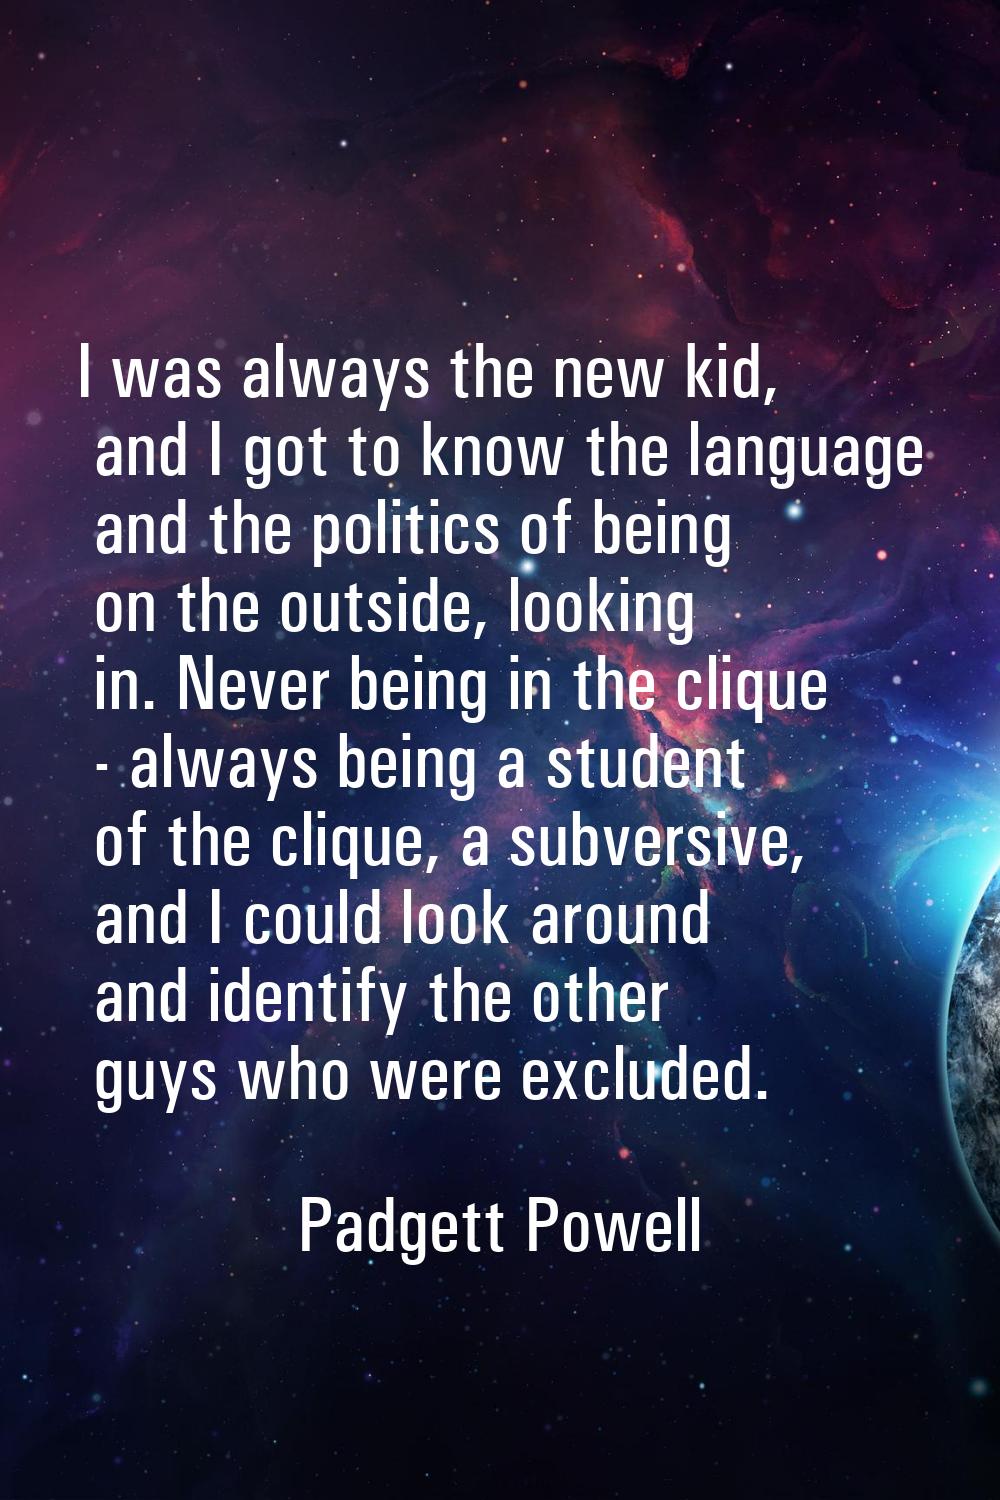 I was always the new kid, and I got to know the language and the politics of being on the outside, 